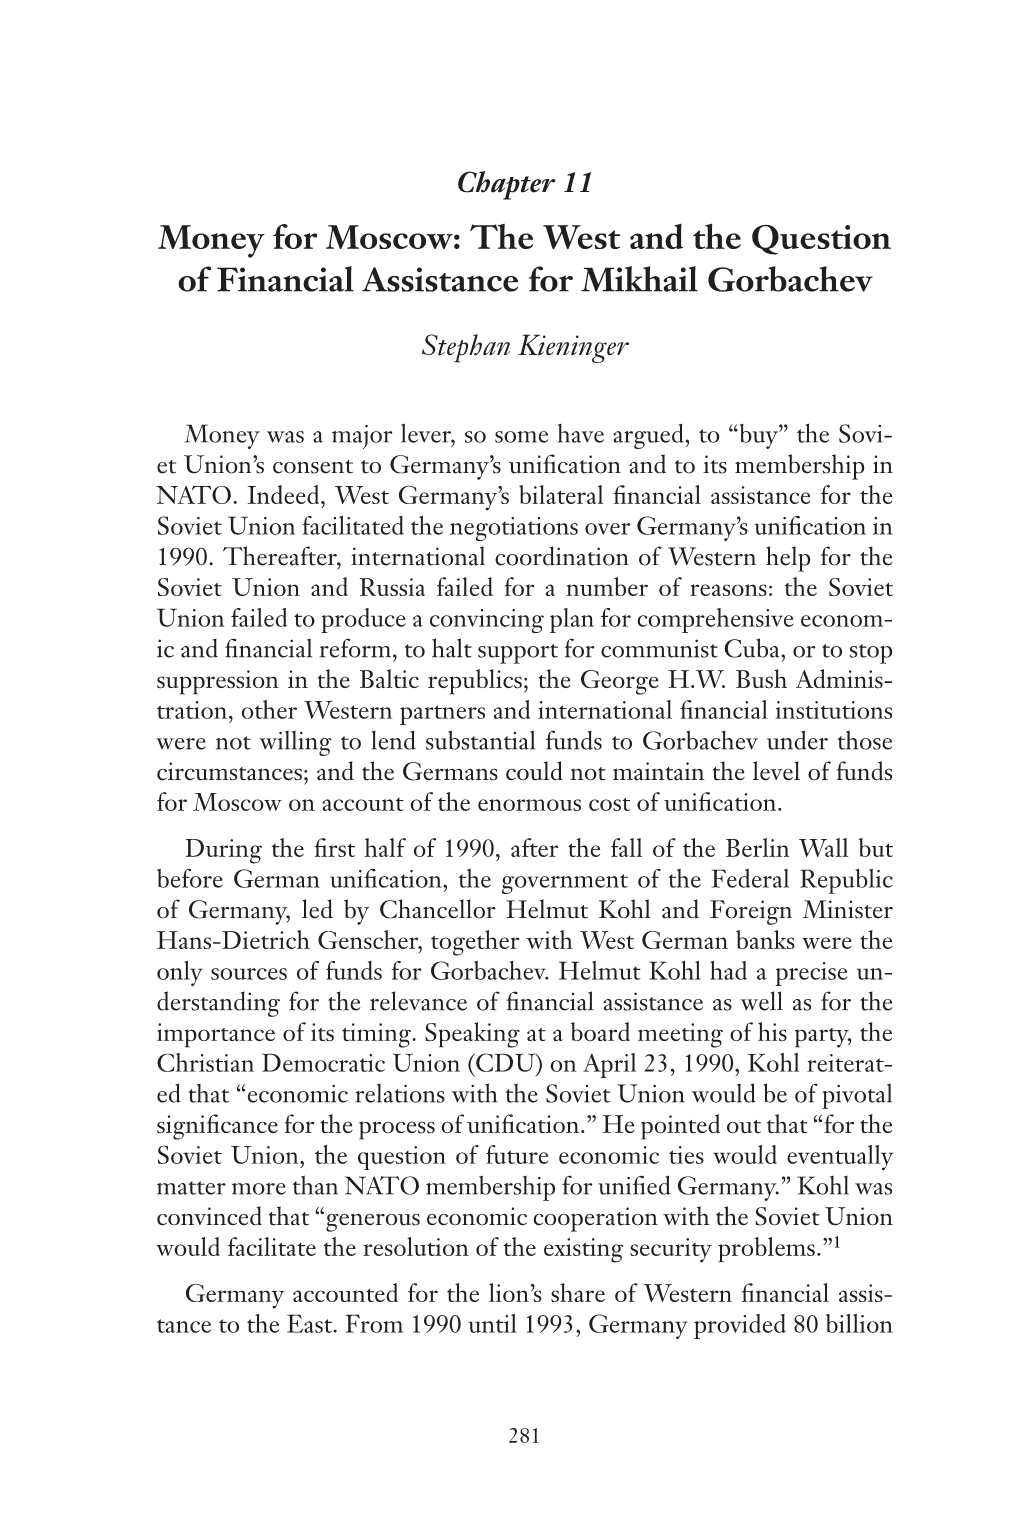 The West and the Question of Financial Assistance for Mikhail Gorbachev 281